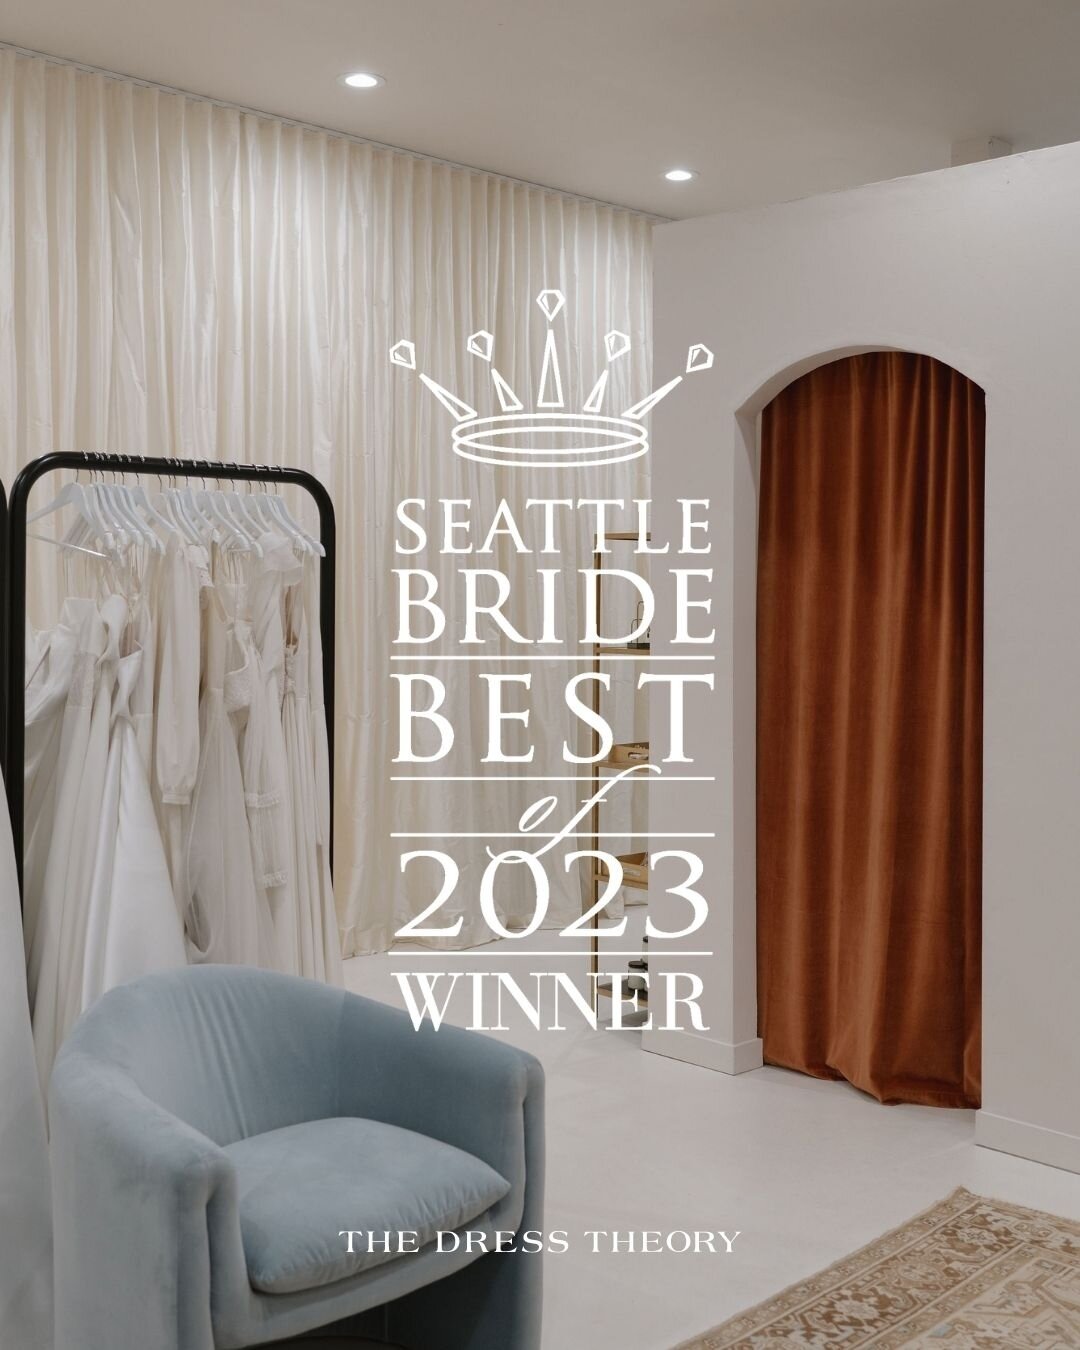 We are absolutely thrilled and honored to receive the title of Best Bridal Boutique 2023. I wanted to take a moment to express my heartfelt gratitude for this incredible recognition.⁠
⁠
This award holds immense significance for our entire team at The